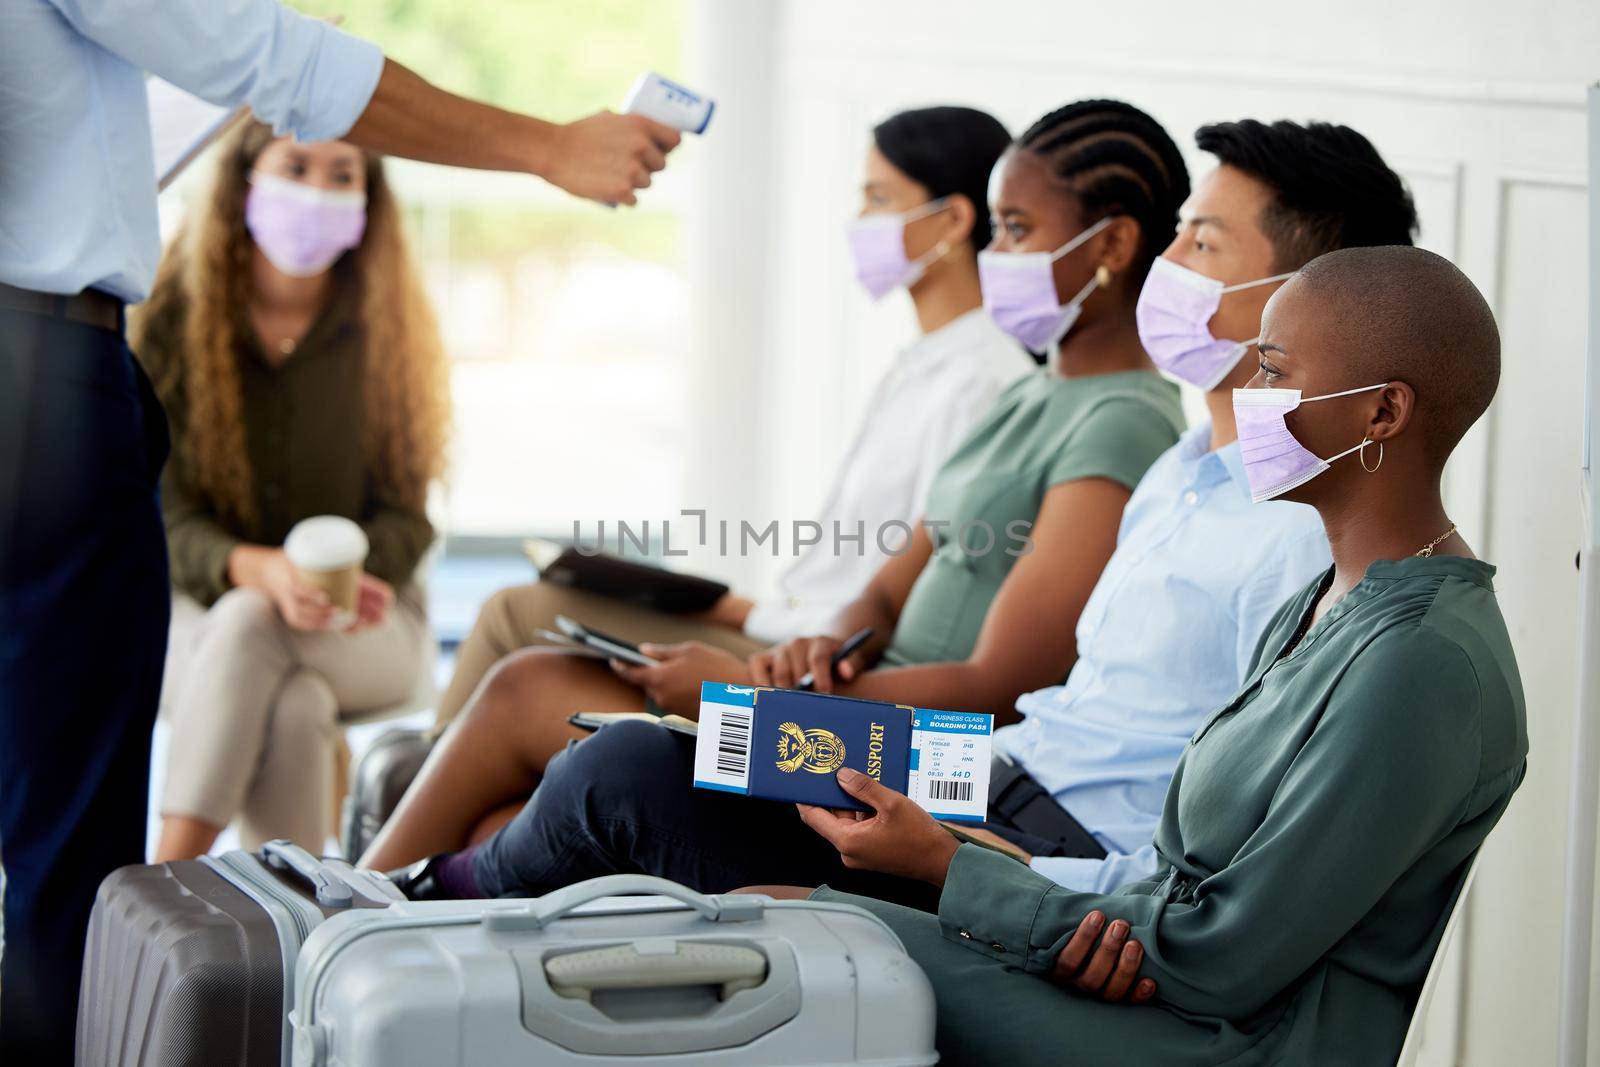 Covid, travel and airport with security scanning a woman with an infrared thermometer for temperature. Immigration, restrictions and passport with a female passenger getting ready to board a flight.